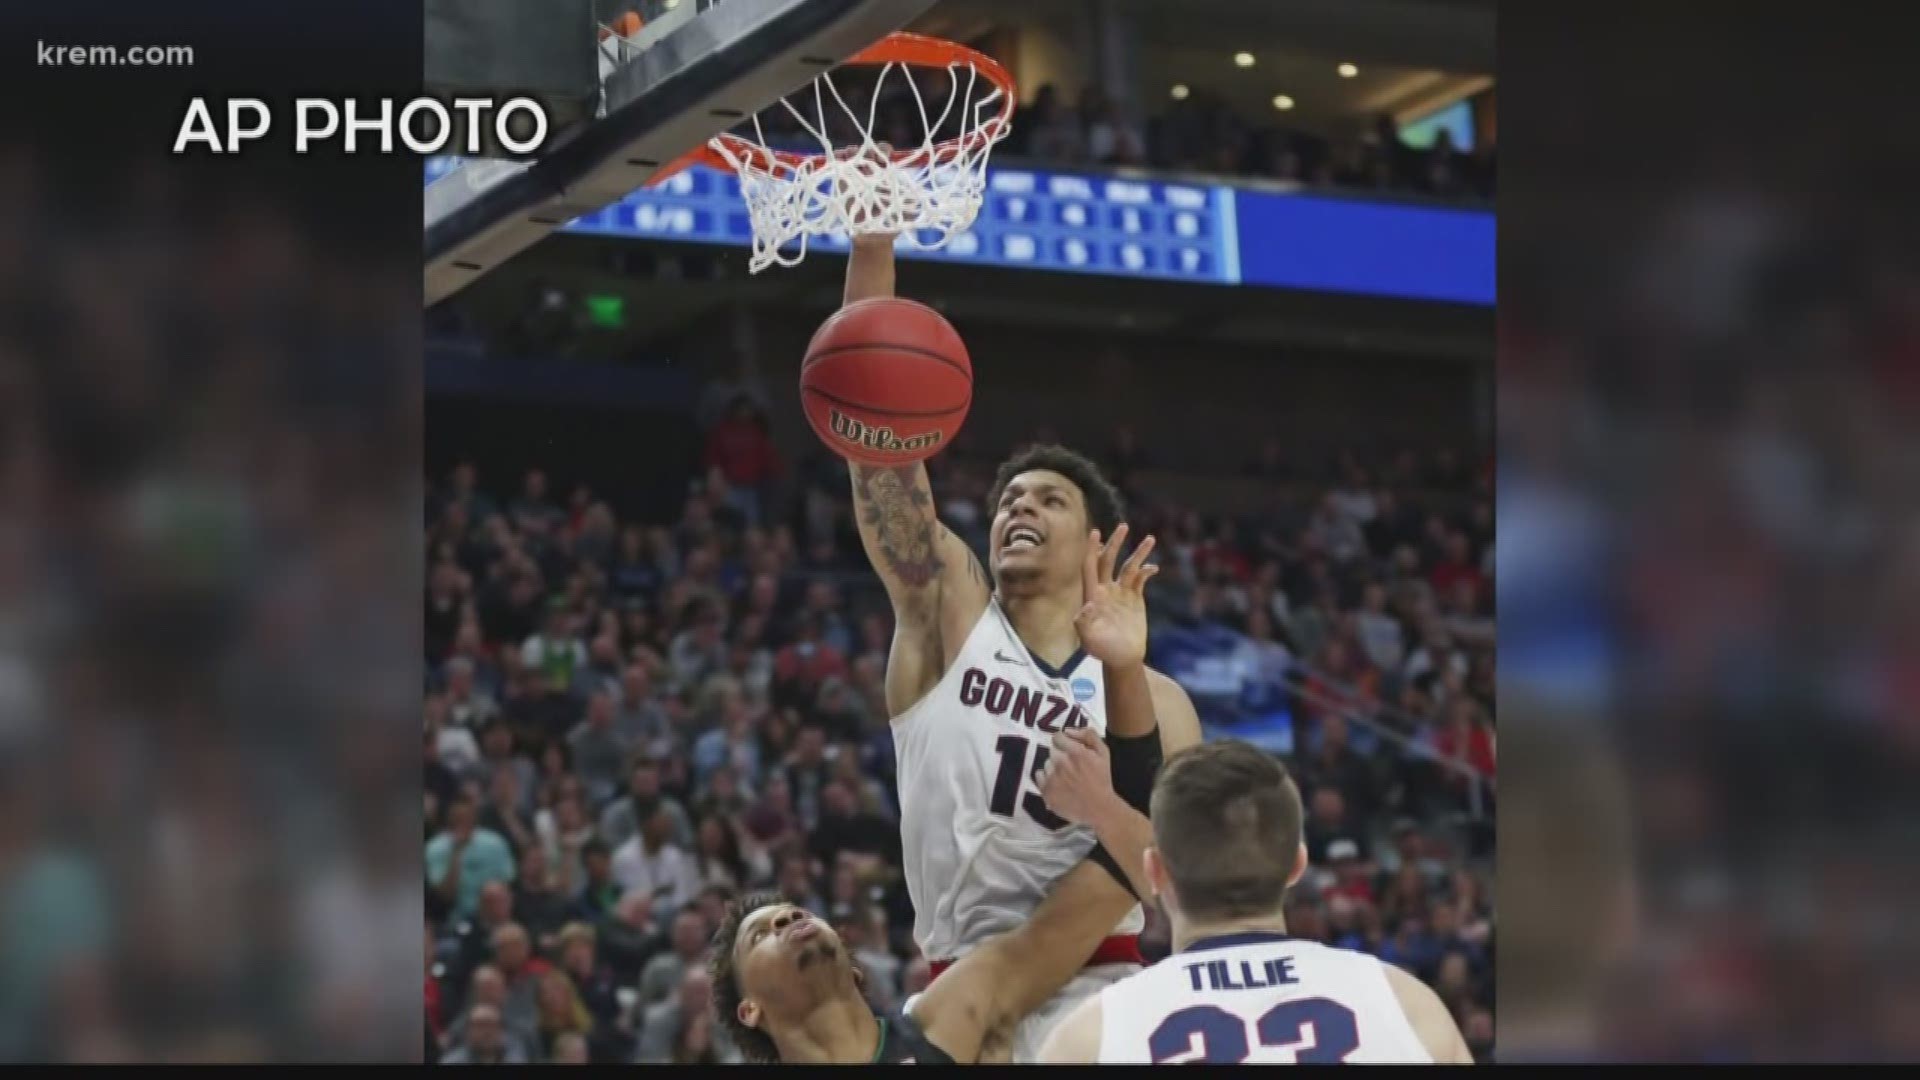 March Madness: Brandon Clarke, Gonzaga get past Baylor in second round